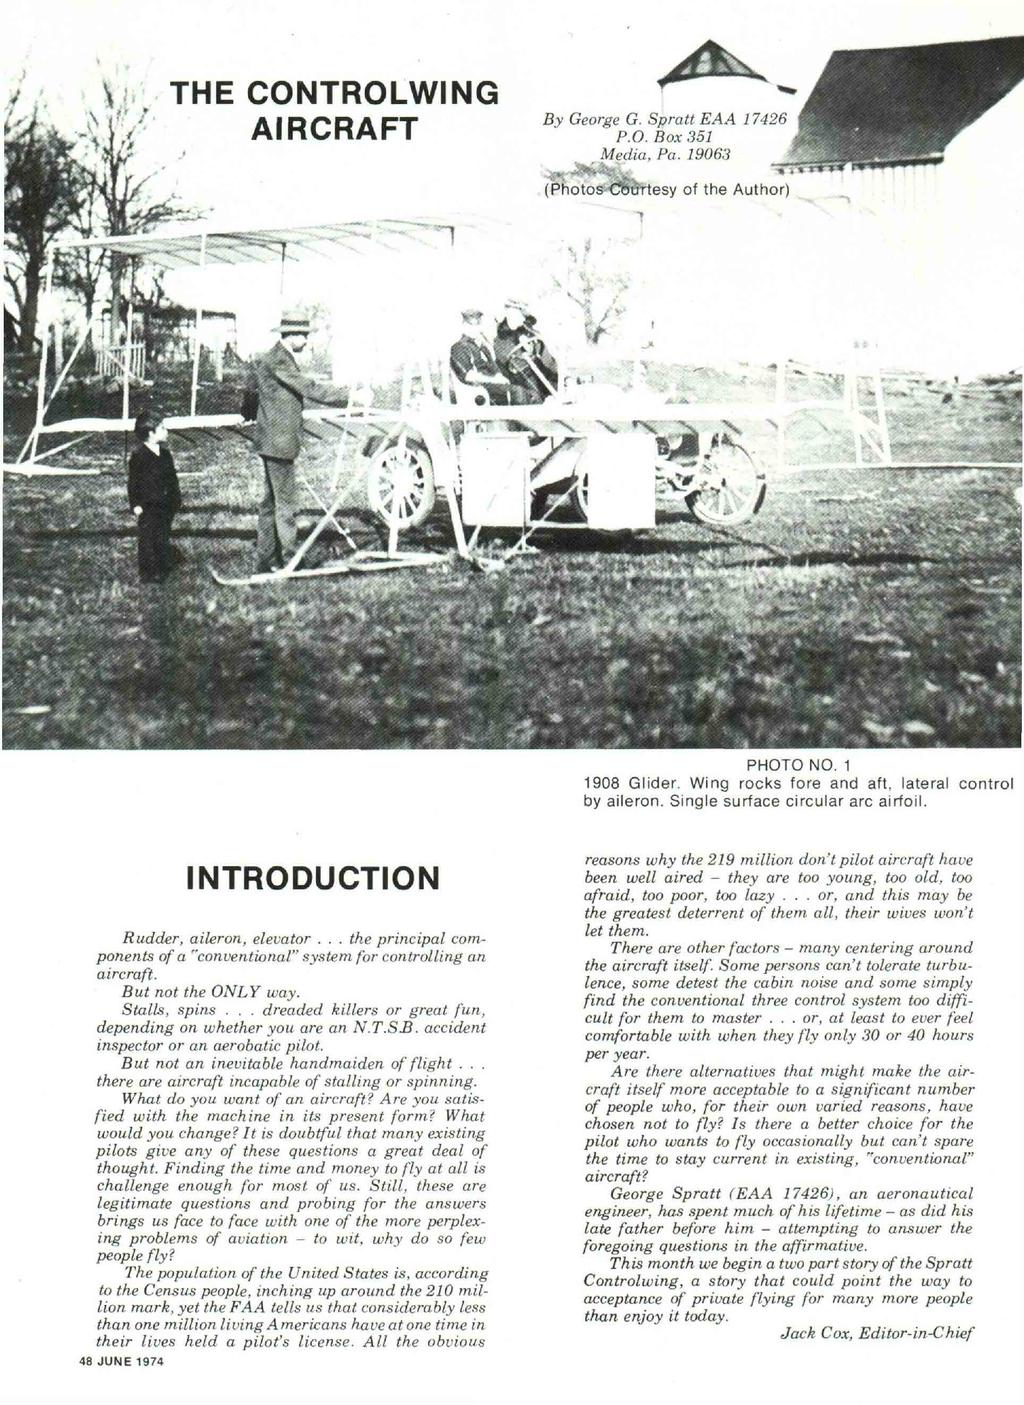 ; * THE CONTROLWING AIRCRAFT By George G. Spratt EAA 17426 P.O. Box 351 Media, Pa. 19063 (PRo lesy of the Author) PHOTO NO. 1 1908 Glider. Wing rocks fore and aft, lateral contro by aileron.